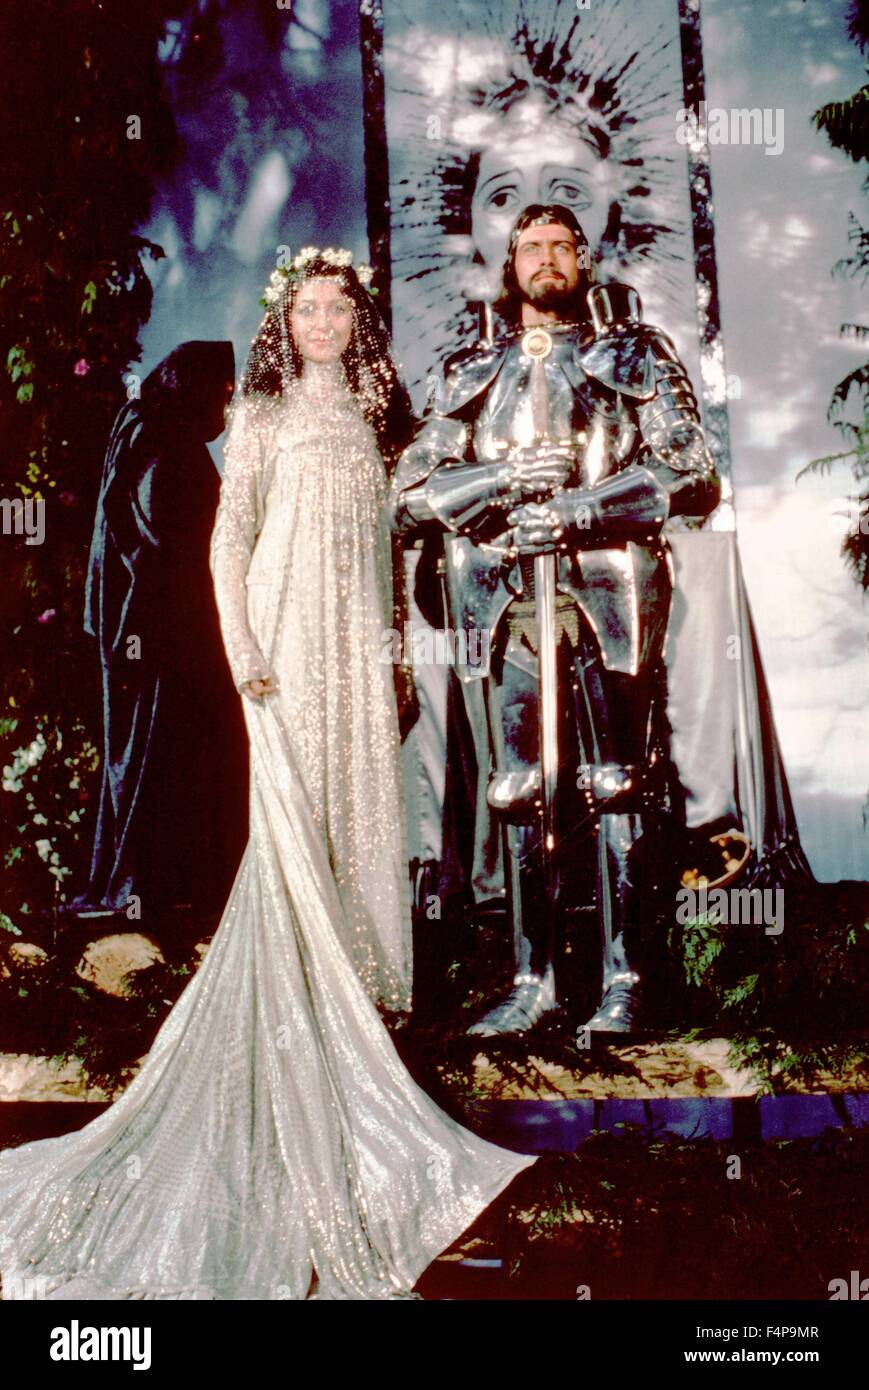 Nigel Terry, Cherie Lunghi / Excalibur 1981 directed by John Boorman Stock Photo